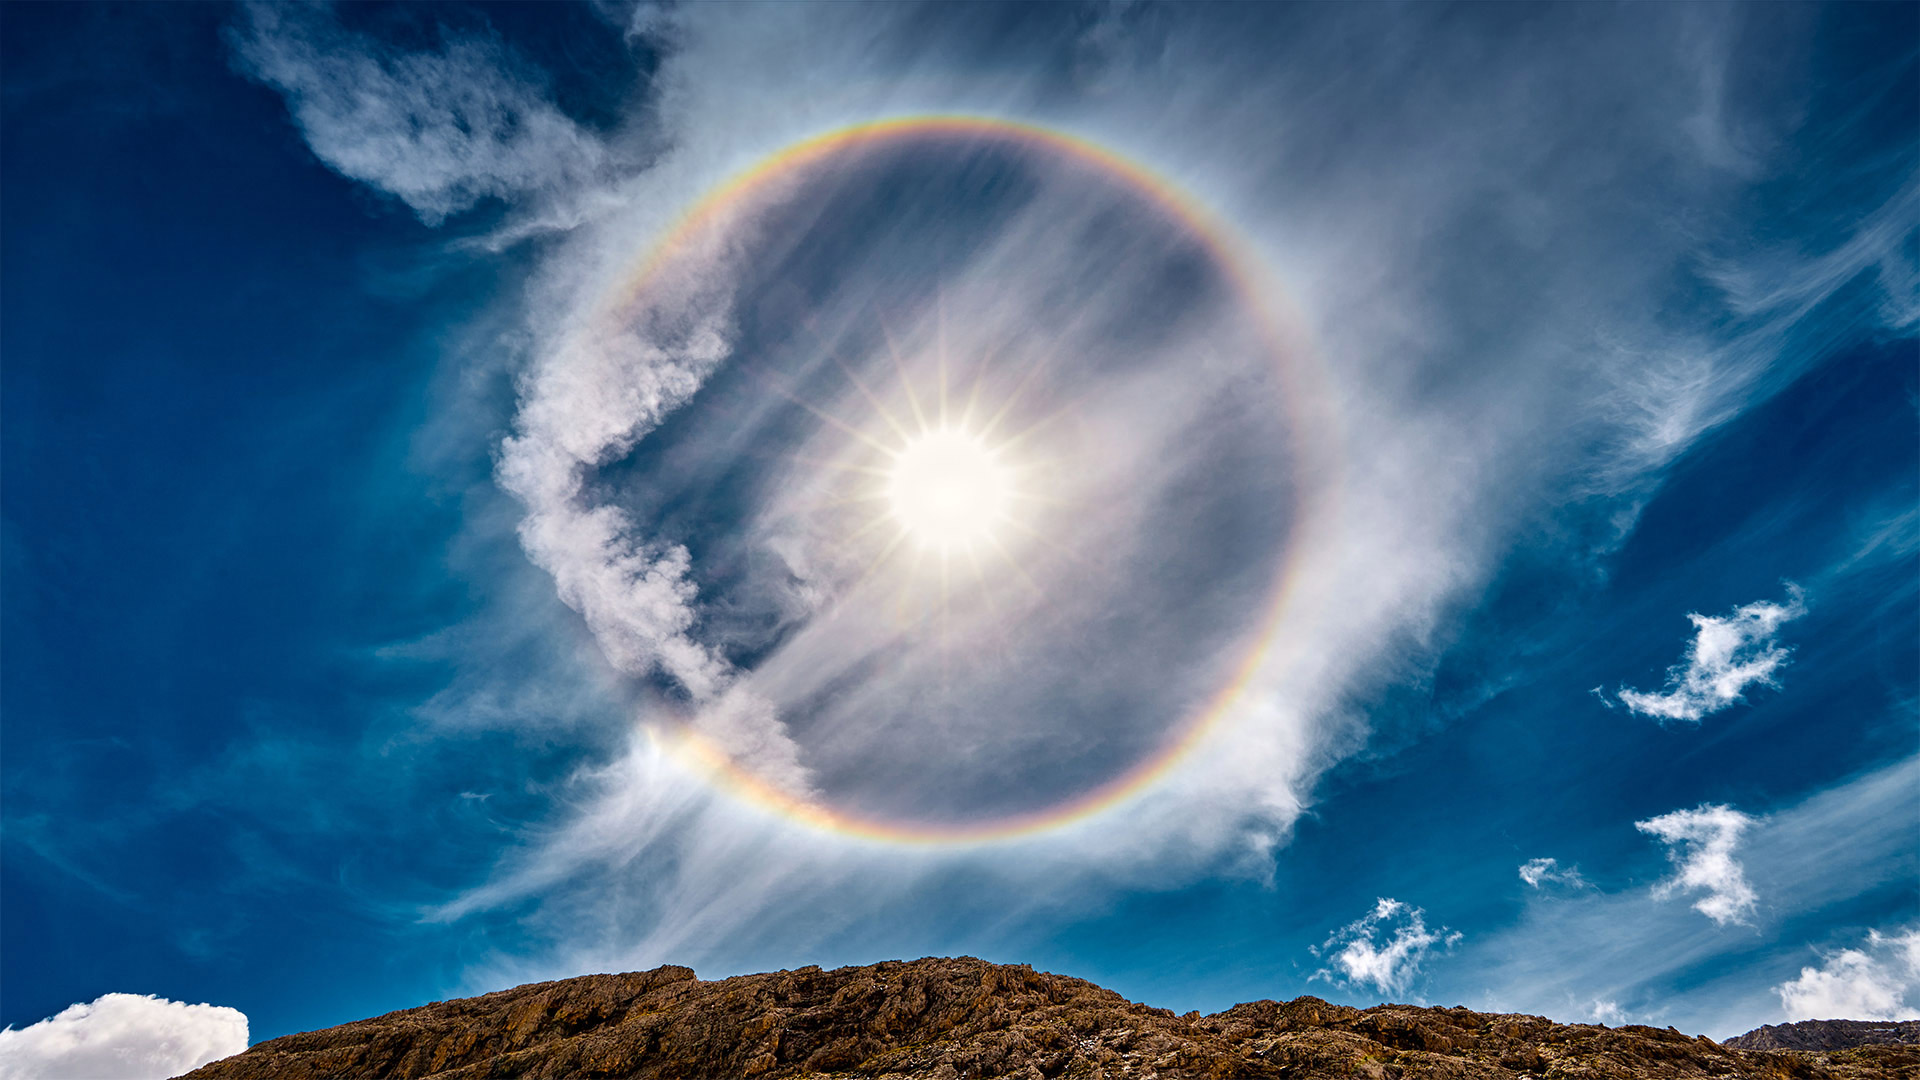 Sun halo over Lake Antermoia in the Dolomite Mountains of Italy - Walter Donega/Getty Images)